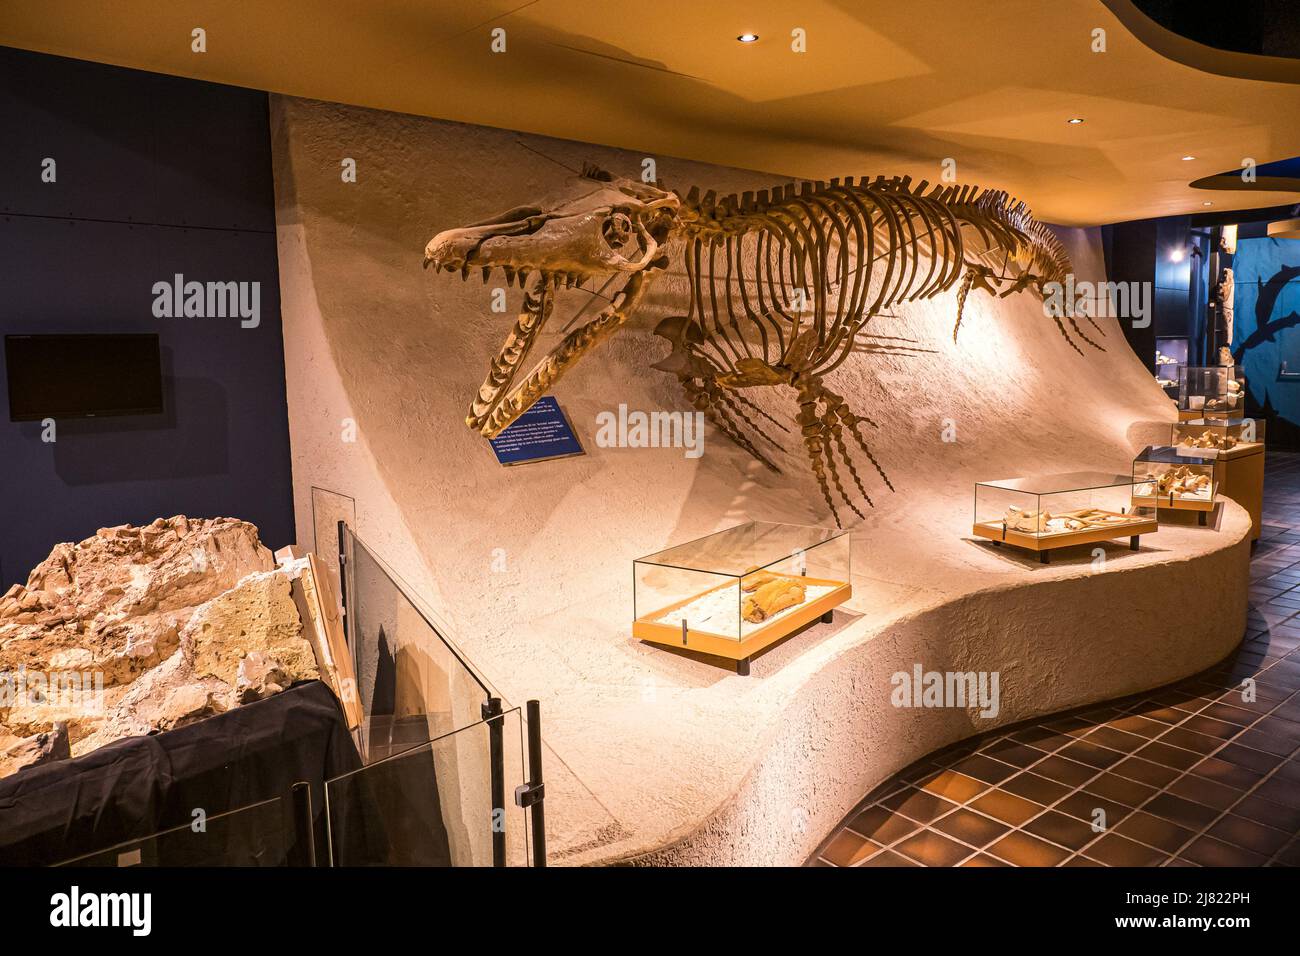 View of a mounted Mosasaurus fossil at the Natural History Museum in  Maastricht, the Netherlands Stock Photo - Alamy